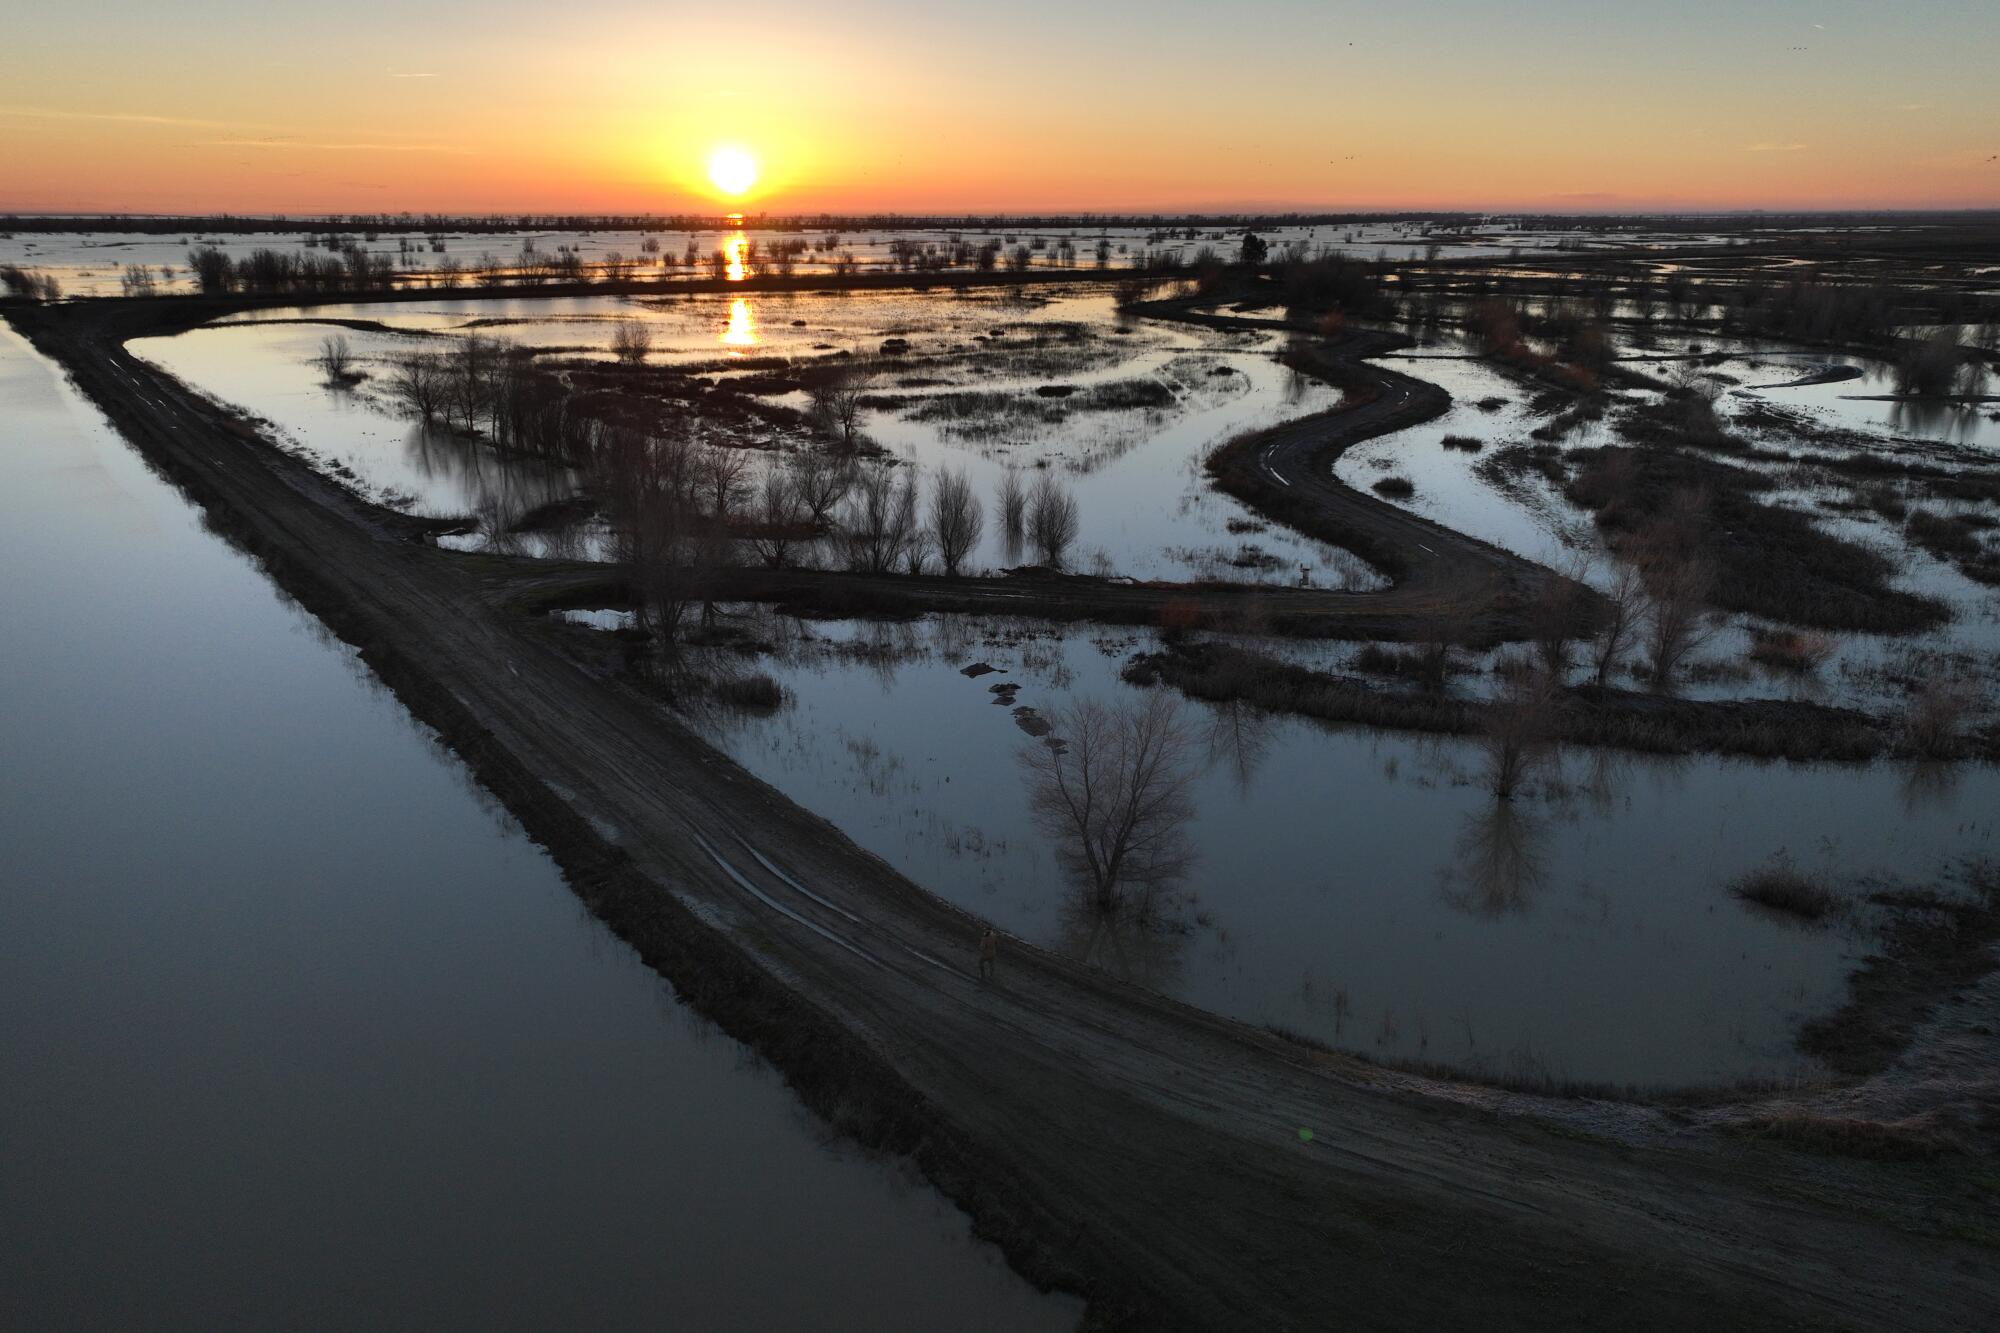 A view of flooded fields with the sun on the horizon